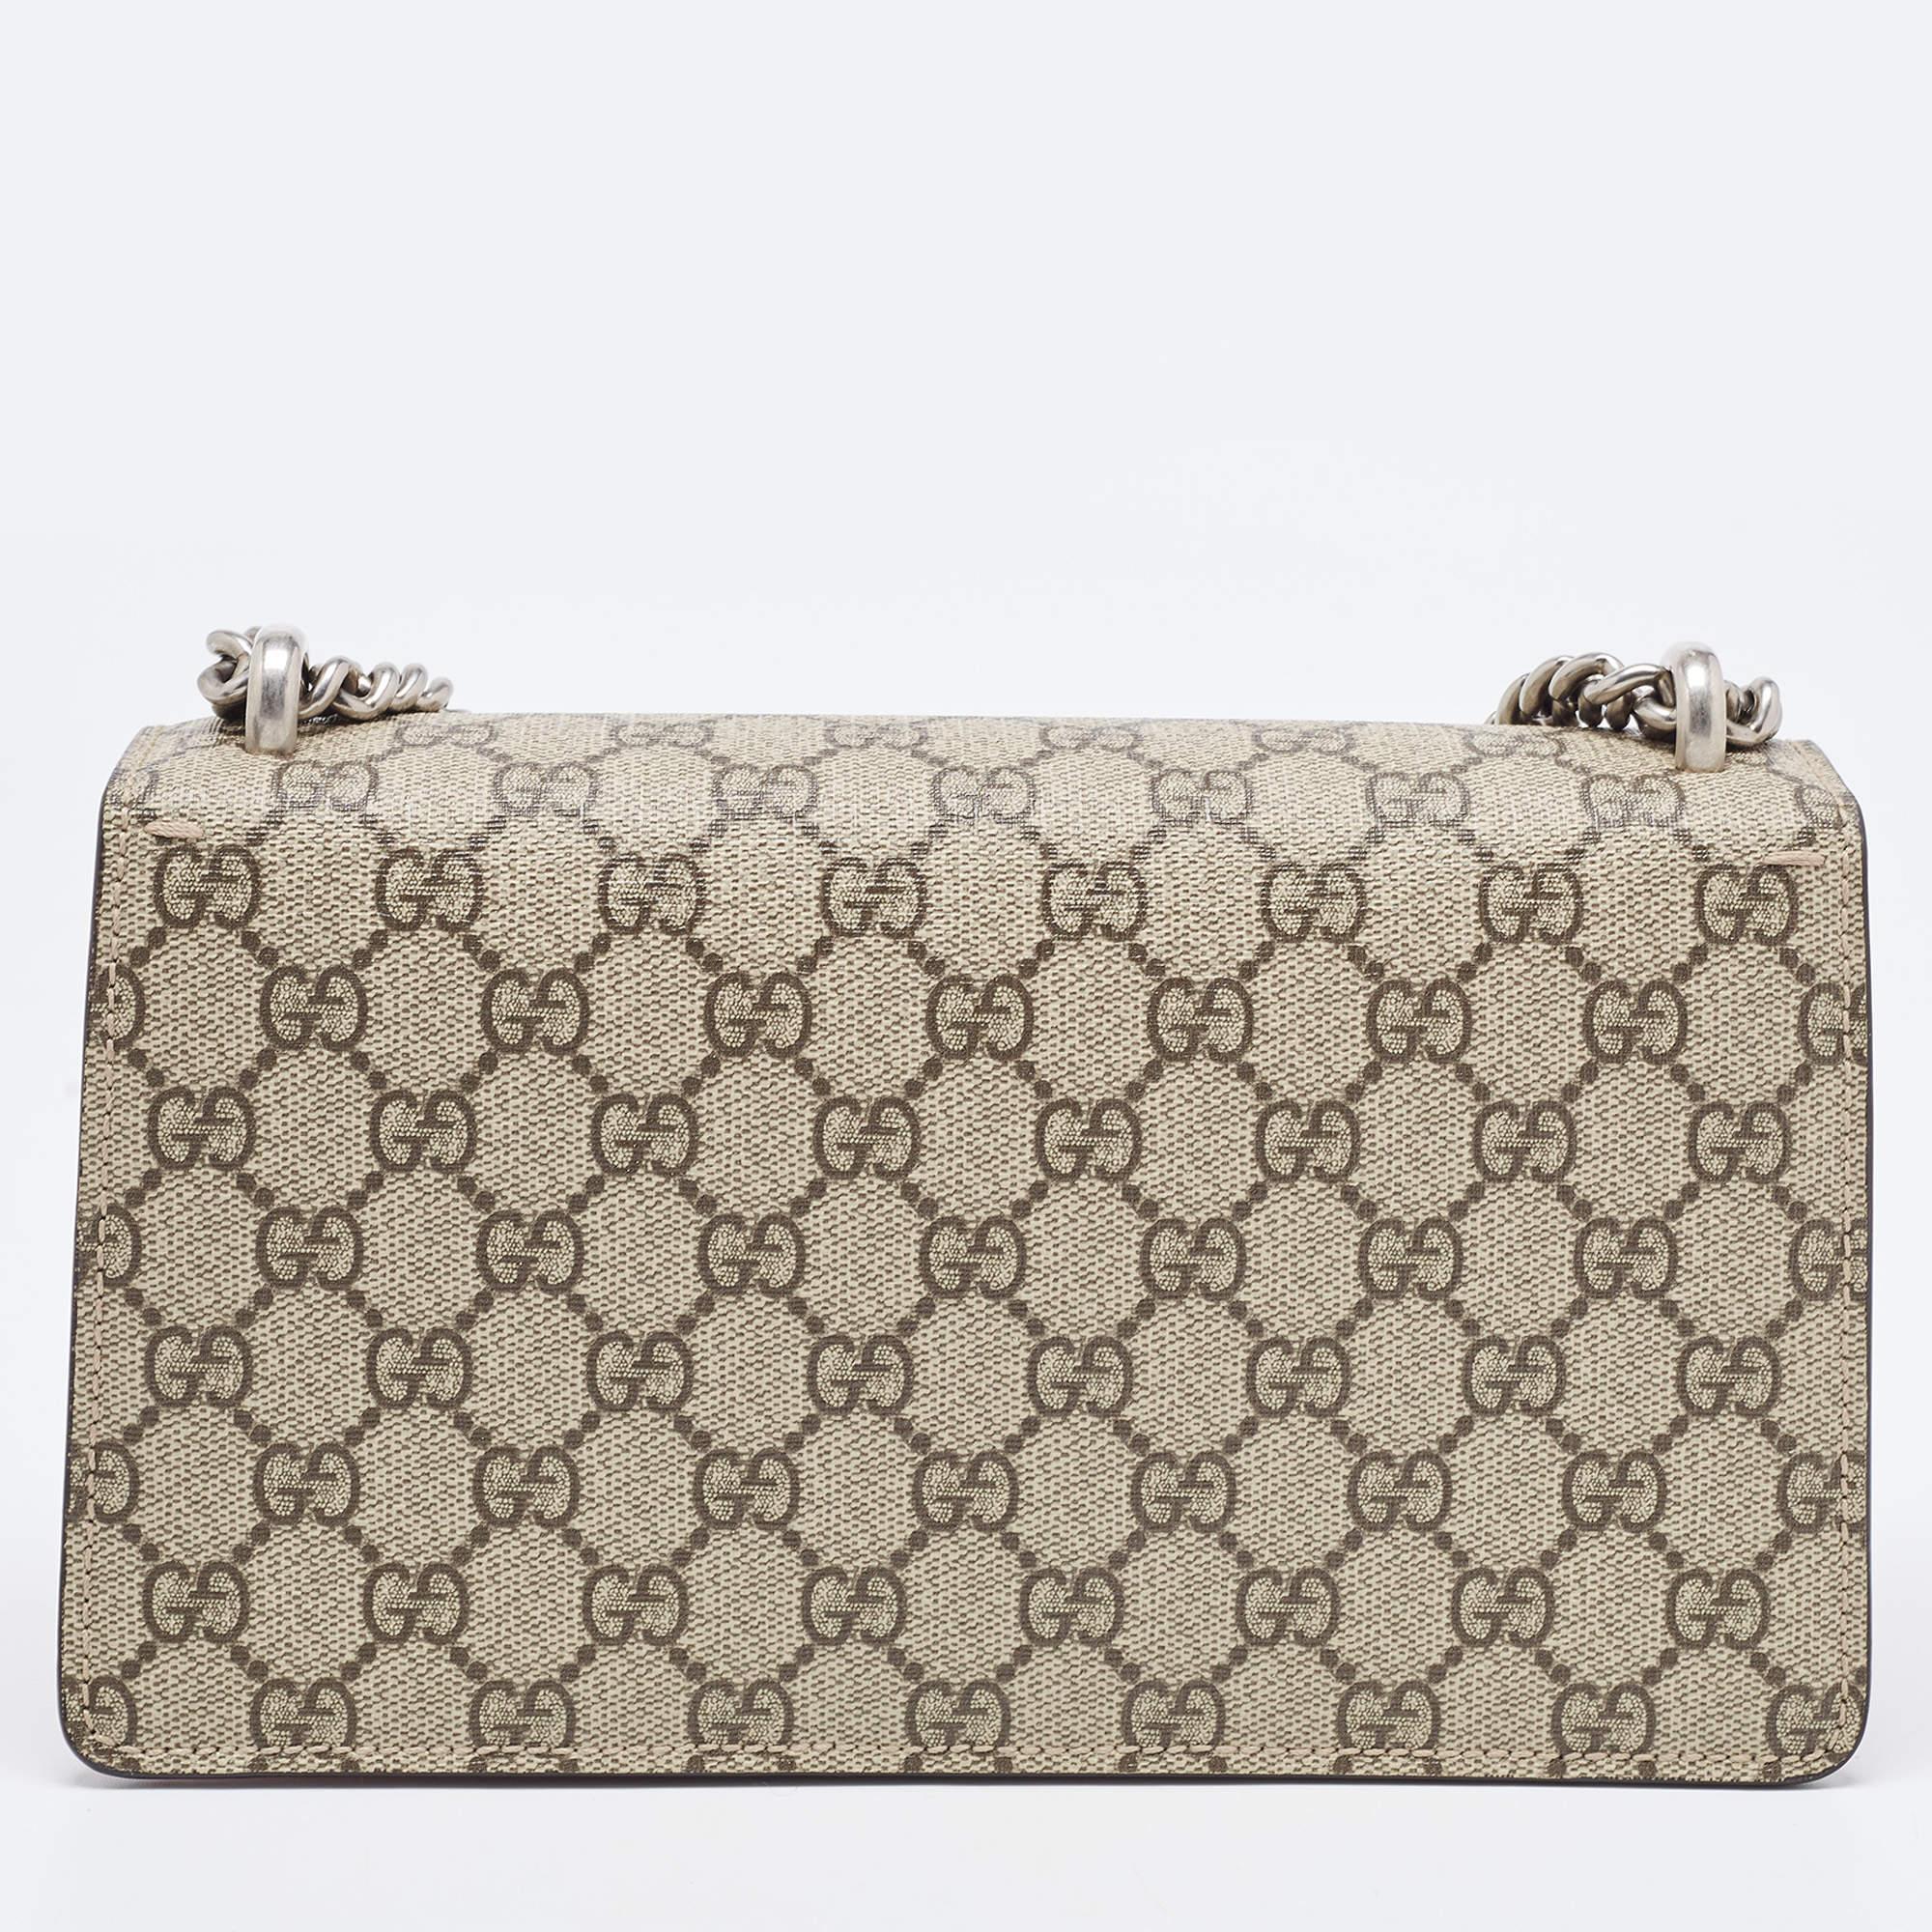 Perfect for conveniently housing your essentials in one place, this Gucci shoulder bag is a worthy investment. It has notable details and offers a look of luxury.

